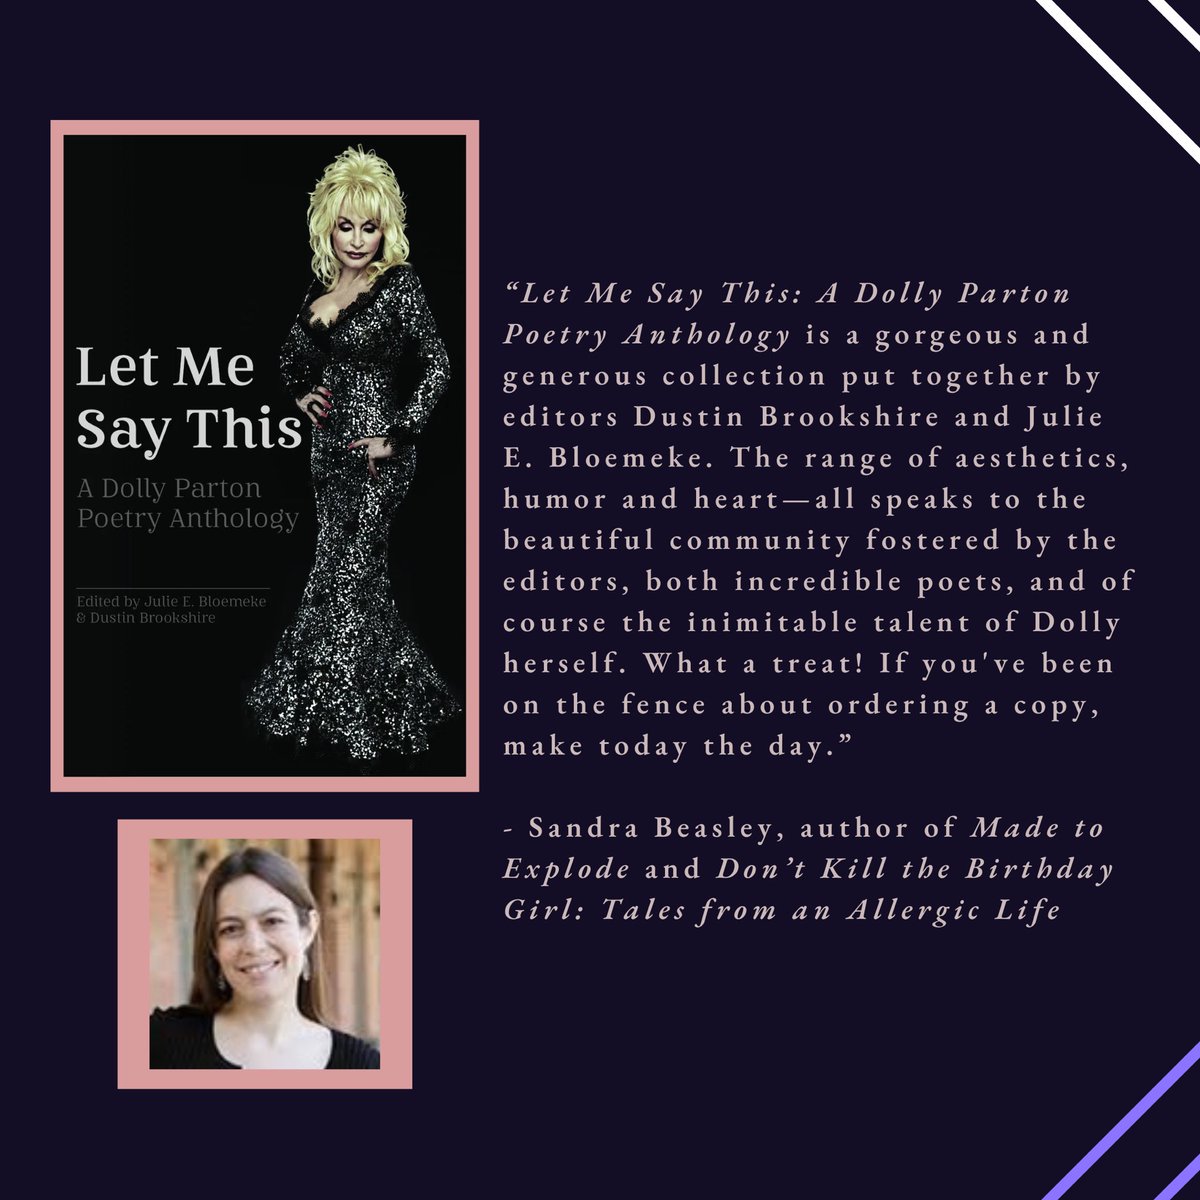 We appreciate these kind words from @SandraBeasley! #dollypoems #letmesaythisanthology #dollyparton #bookblurb